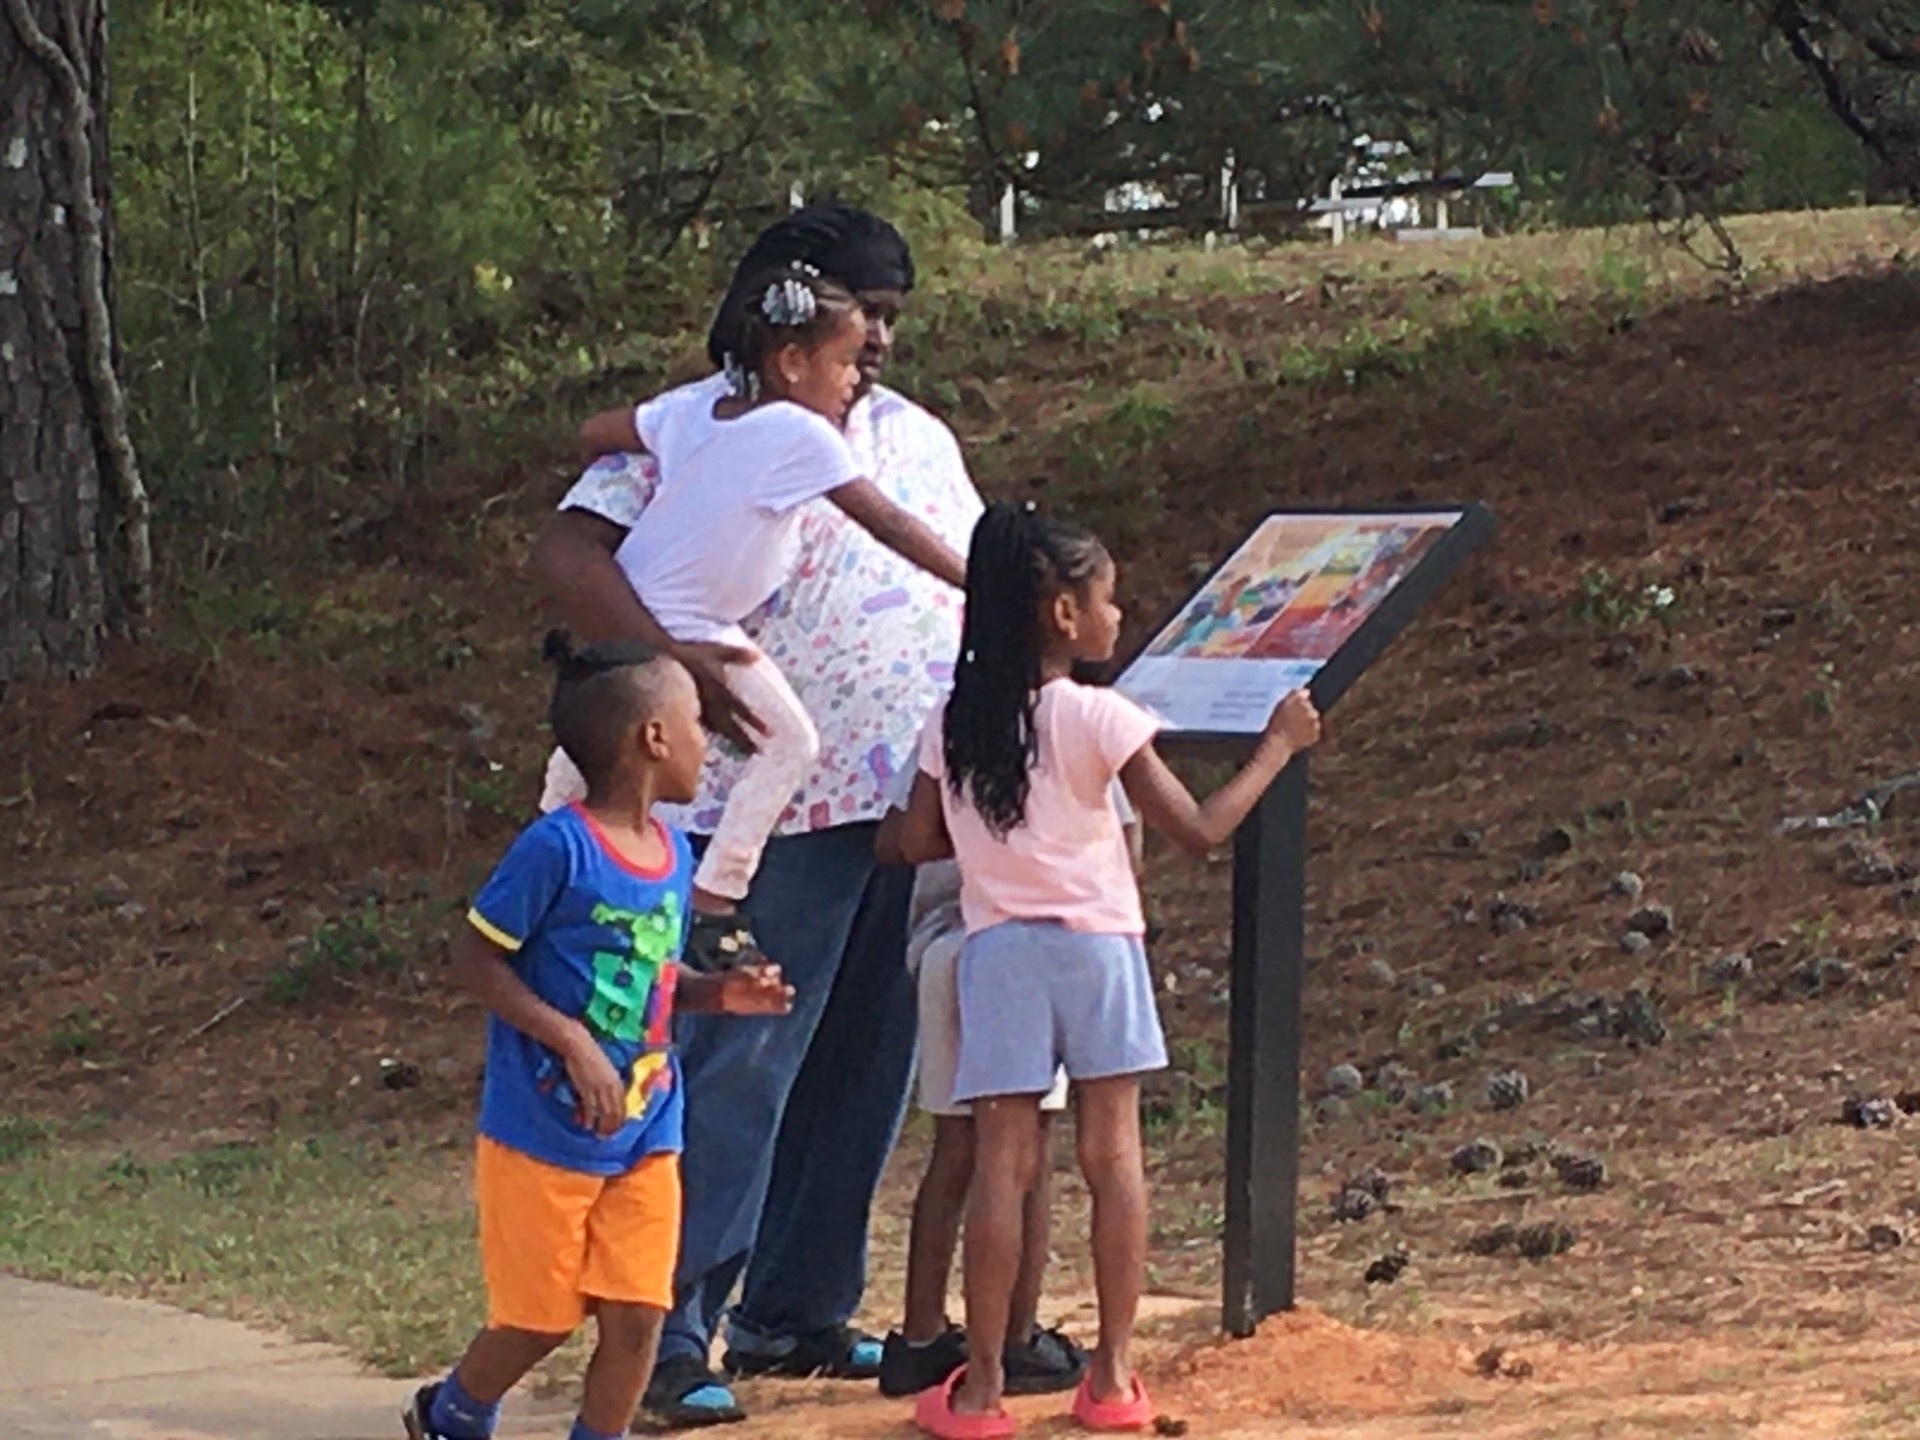 A family stops to read "Grayson's Play Date" at Tale Trail on a path at the Collins P. Lee Community Center in Milledgeville.